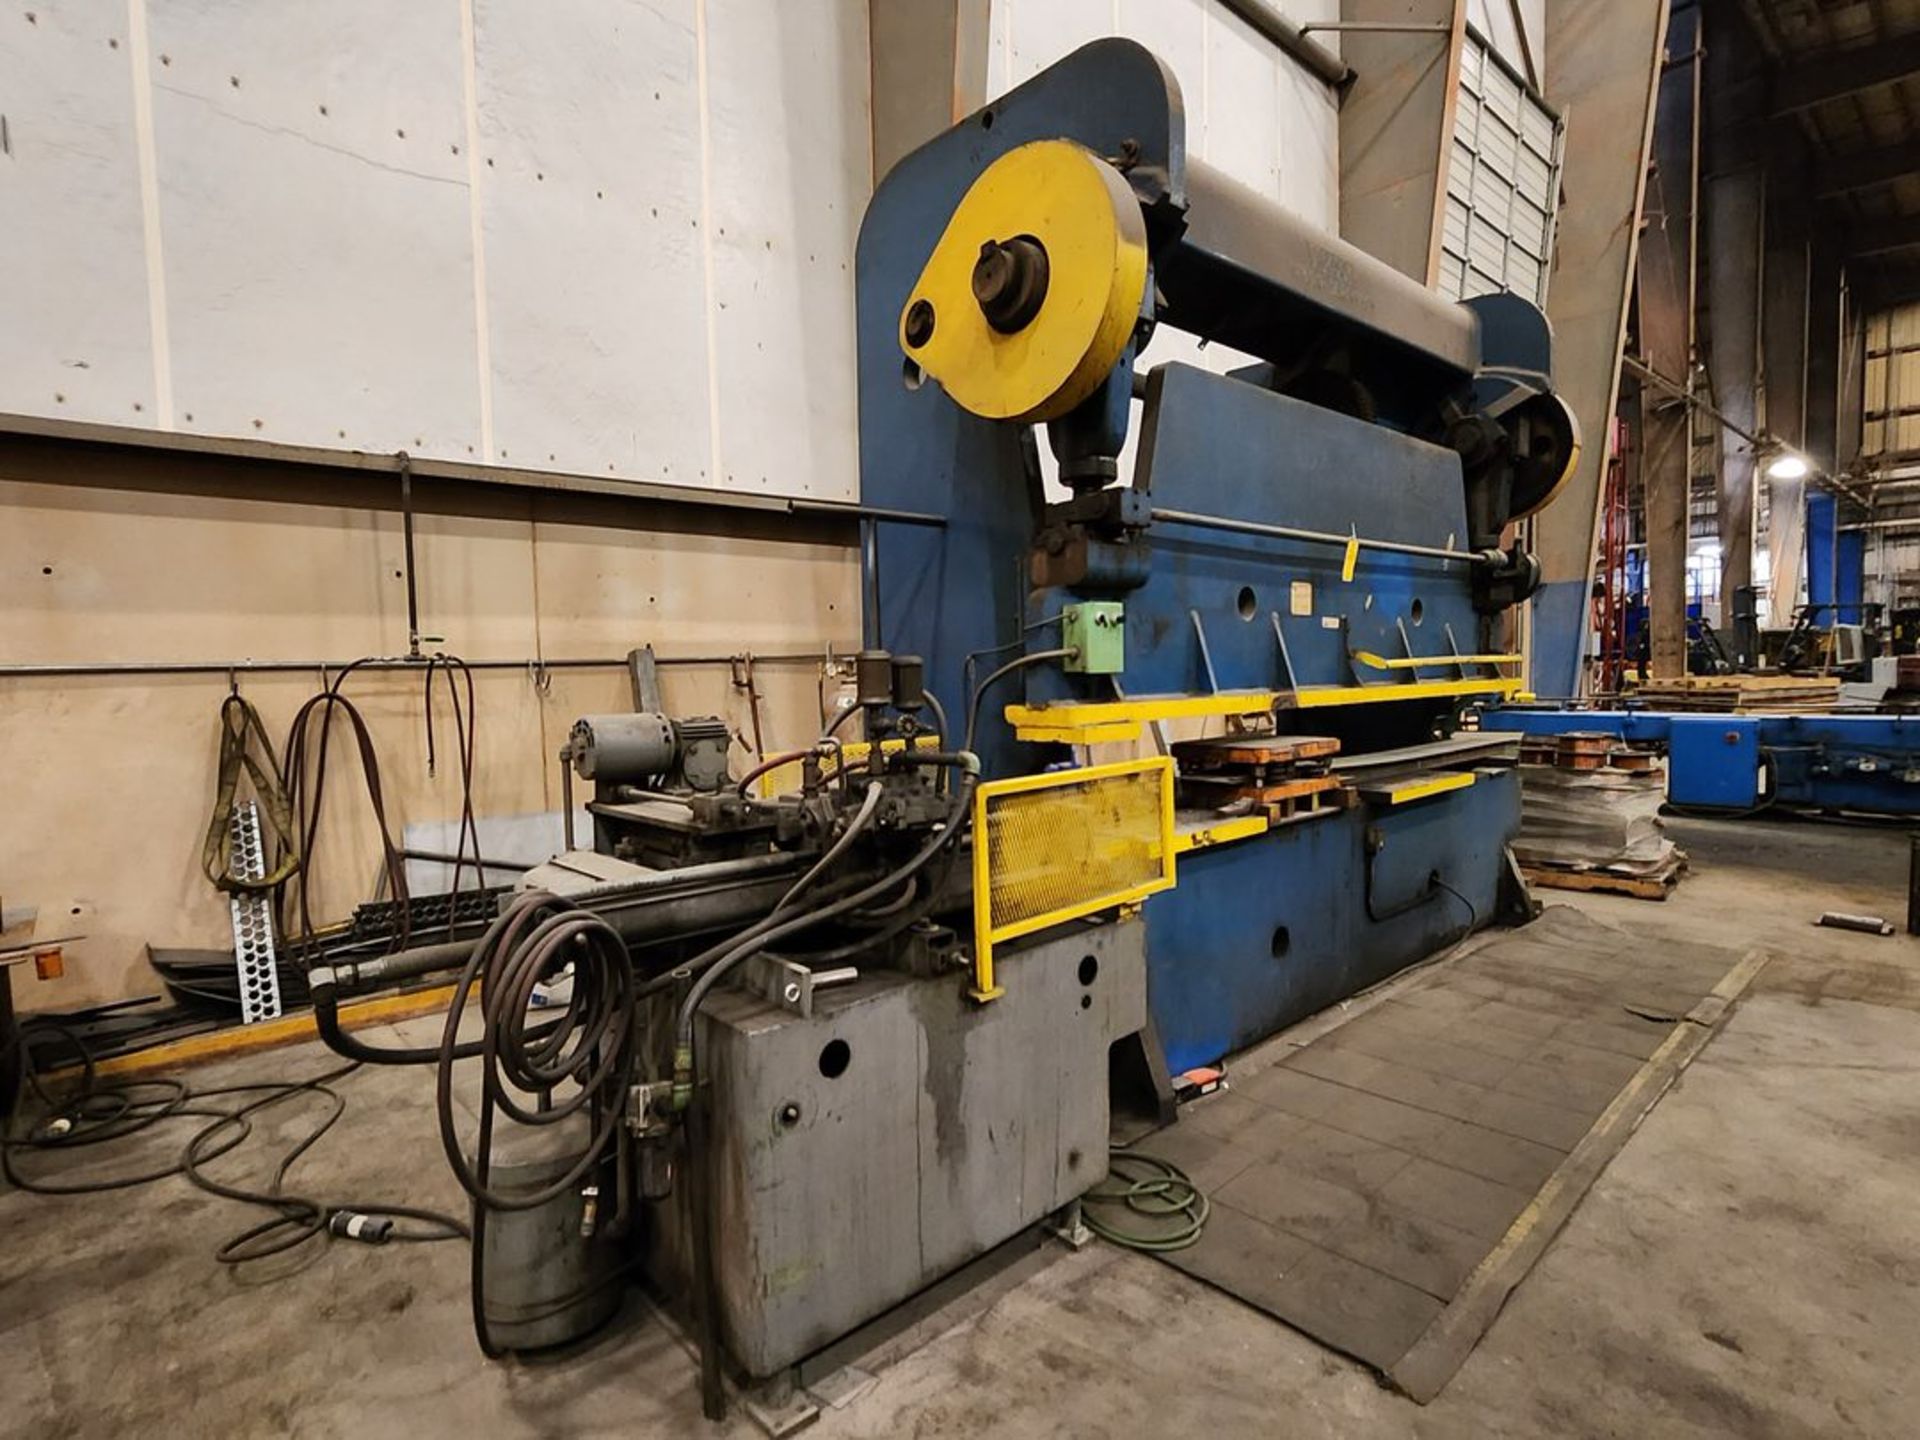 Verson 6010 60Ton Punch Press 10' Bed, W/ Foot Control, W/ Coil, W/ Stl. Plates; (No Tag); To - Image 5 of 26